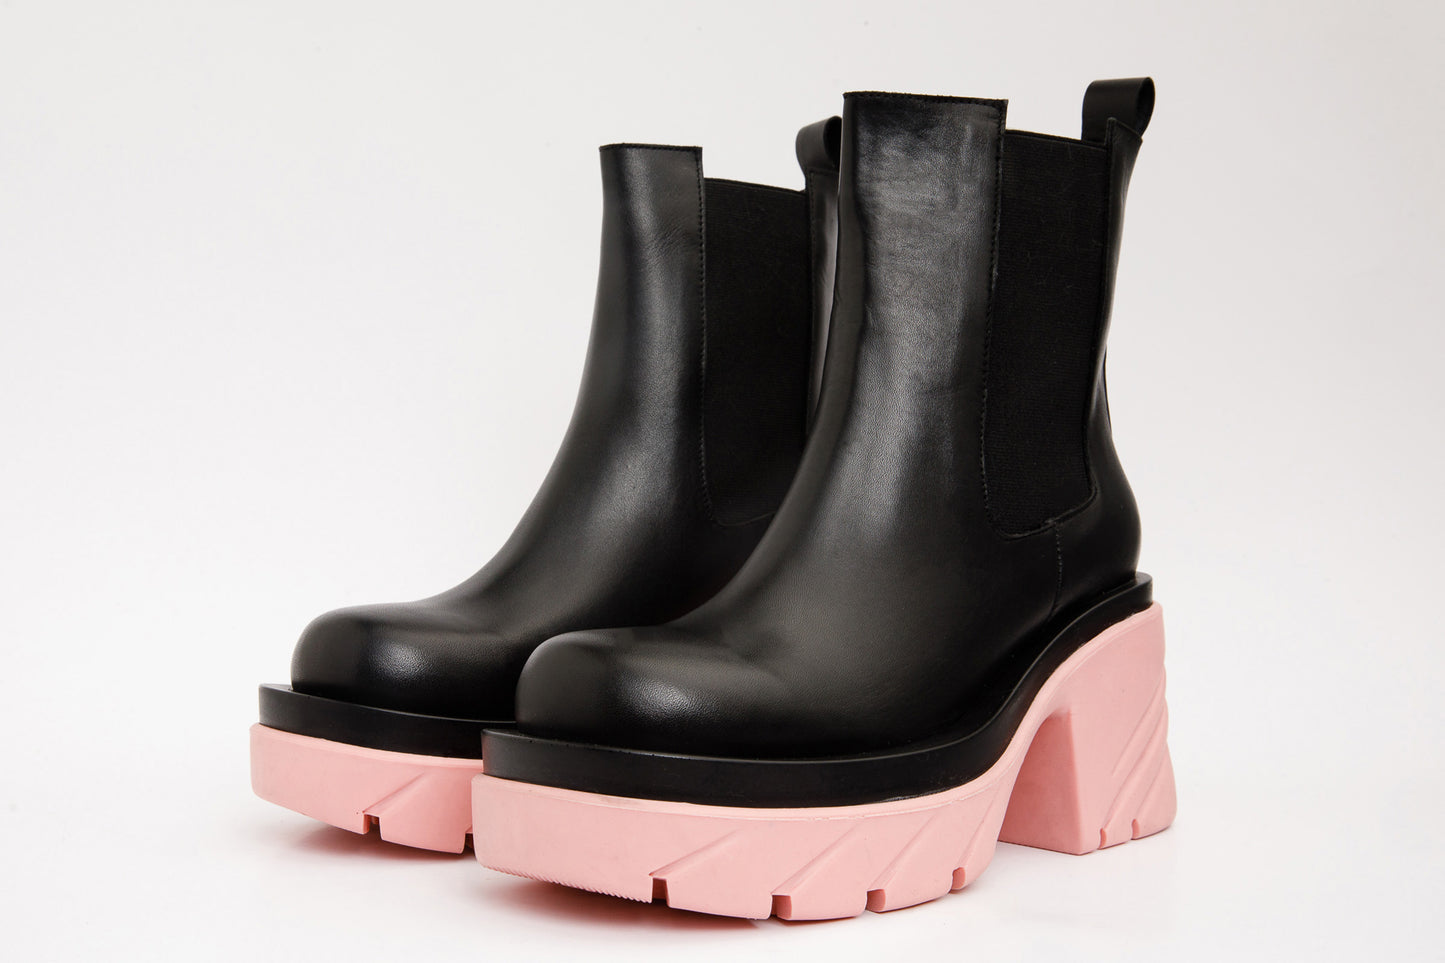 The Olga Black & Pink Leather Mid Calf Women Boot